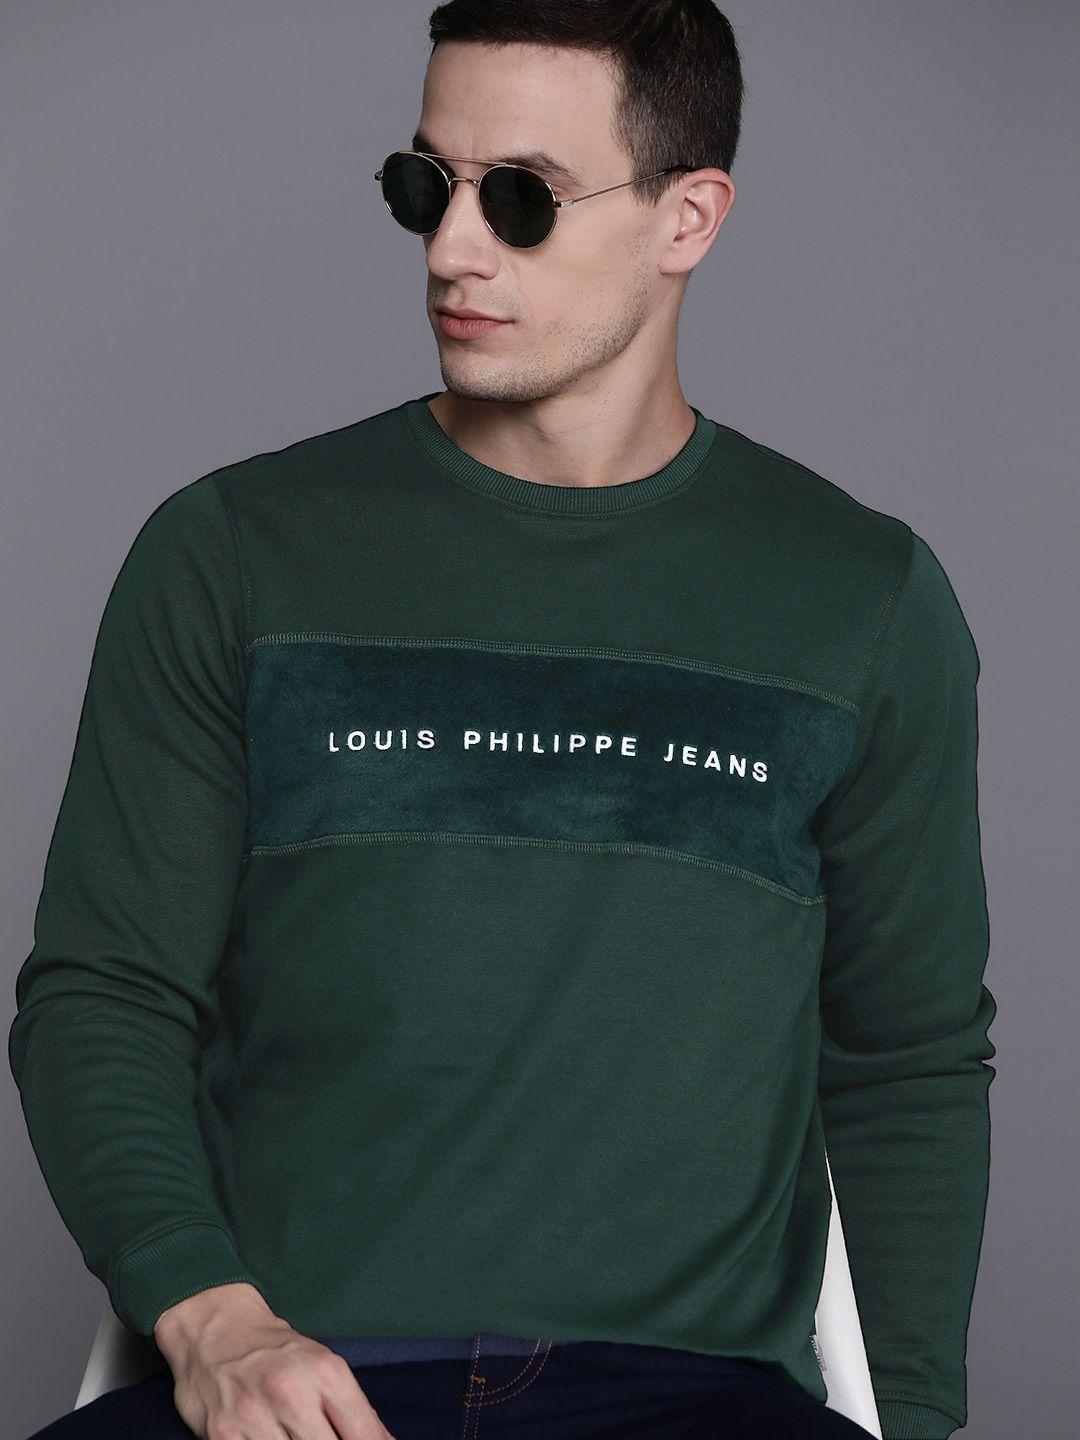 louis philippe jeans embroidered detail sweatshirt